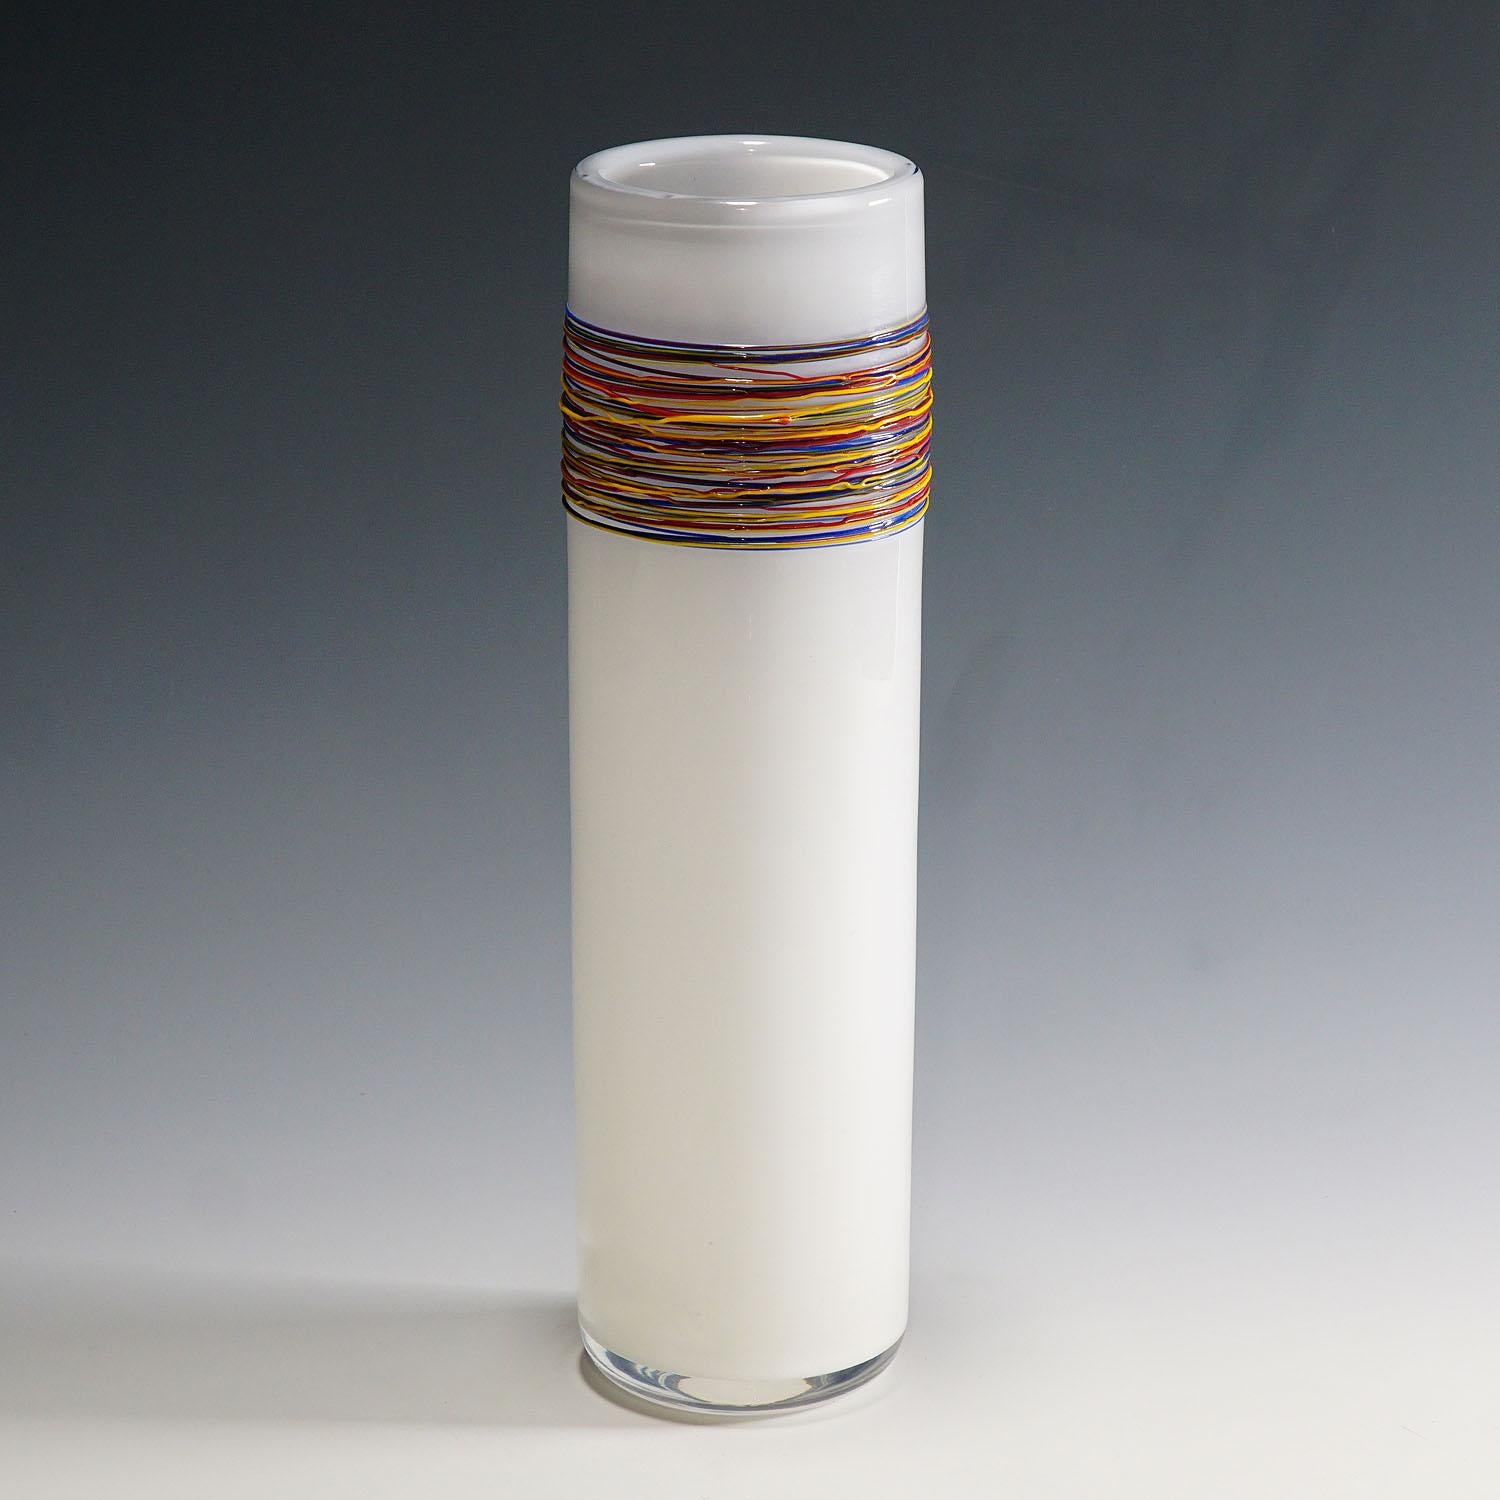 A vintage art glass vase designed and manufactured at the Technical Art Glass School Zwiesel in Bavaria (Glasfachschule Zwiesel). Opaque white glass with a clear glass overlay, decorated with hot fused glass treads in red, yellow and blue opaque